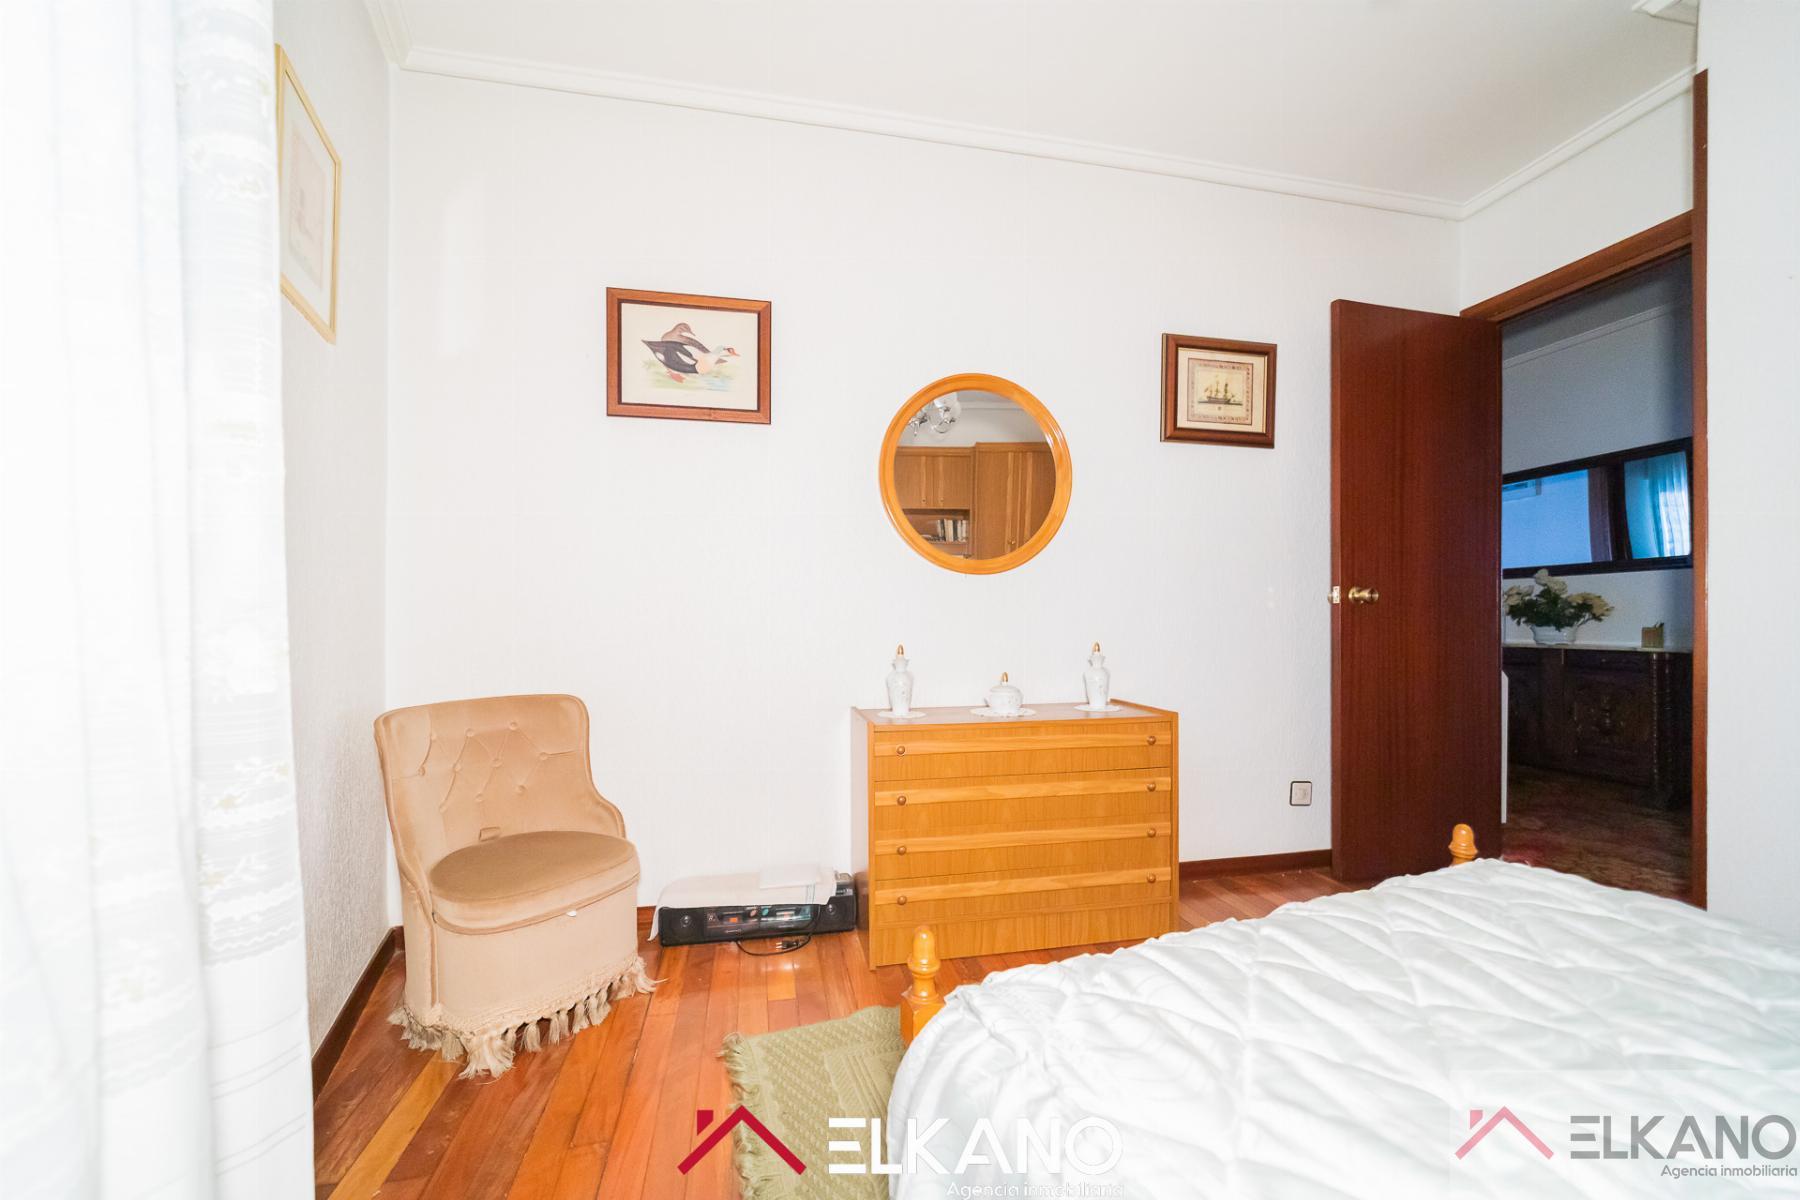 For sale of flat in Portugalete